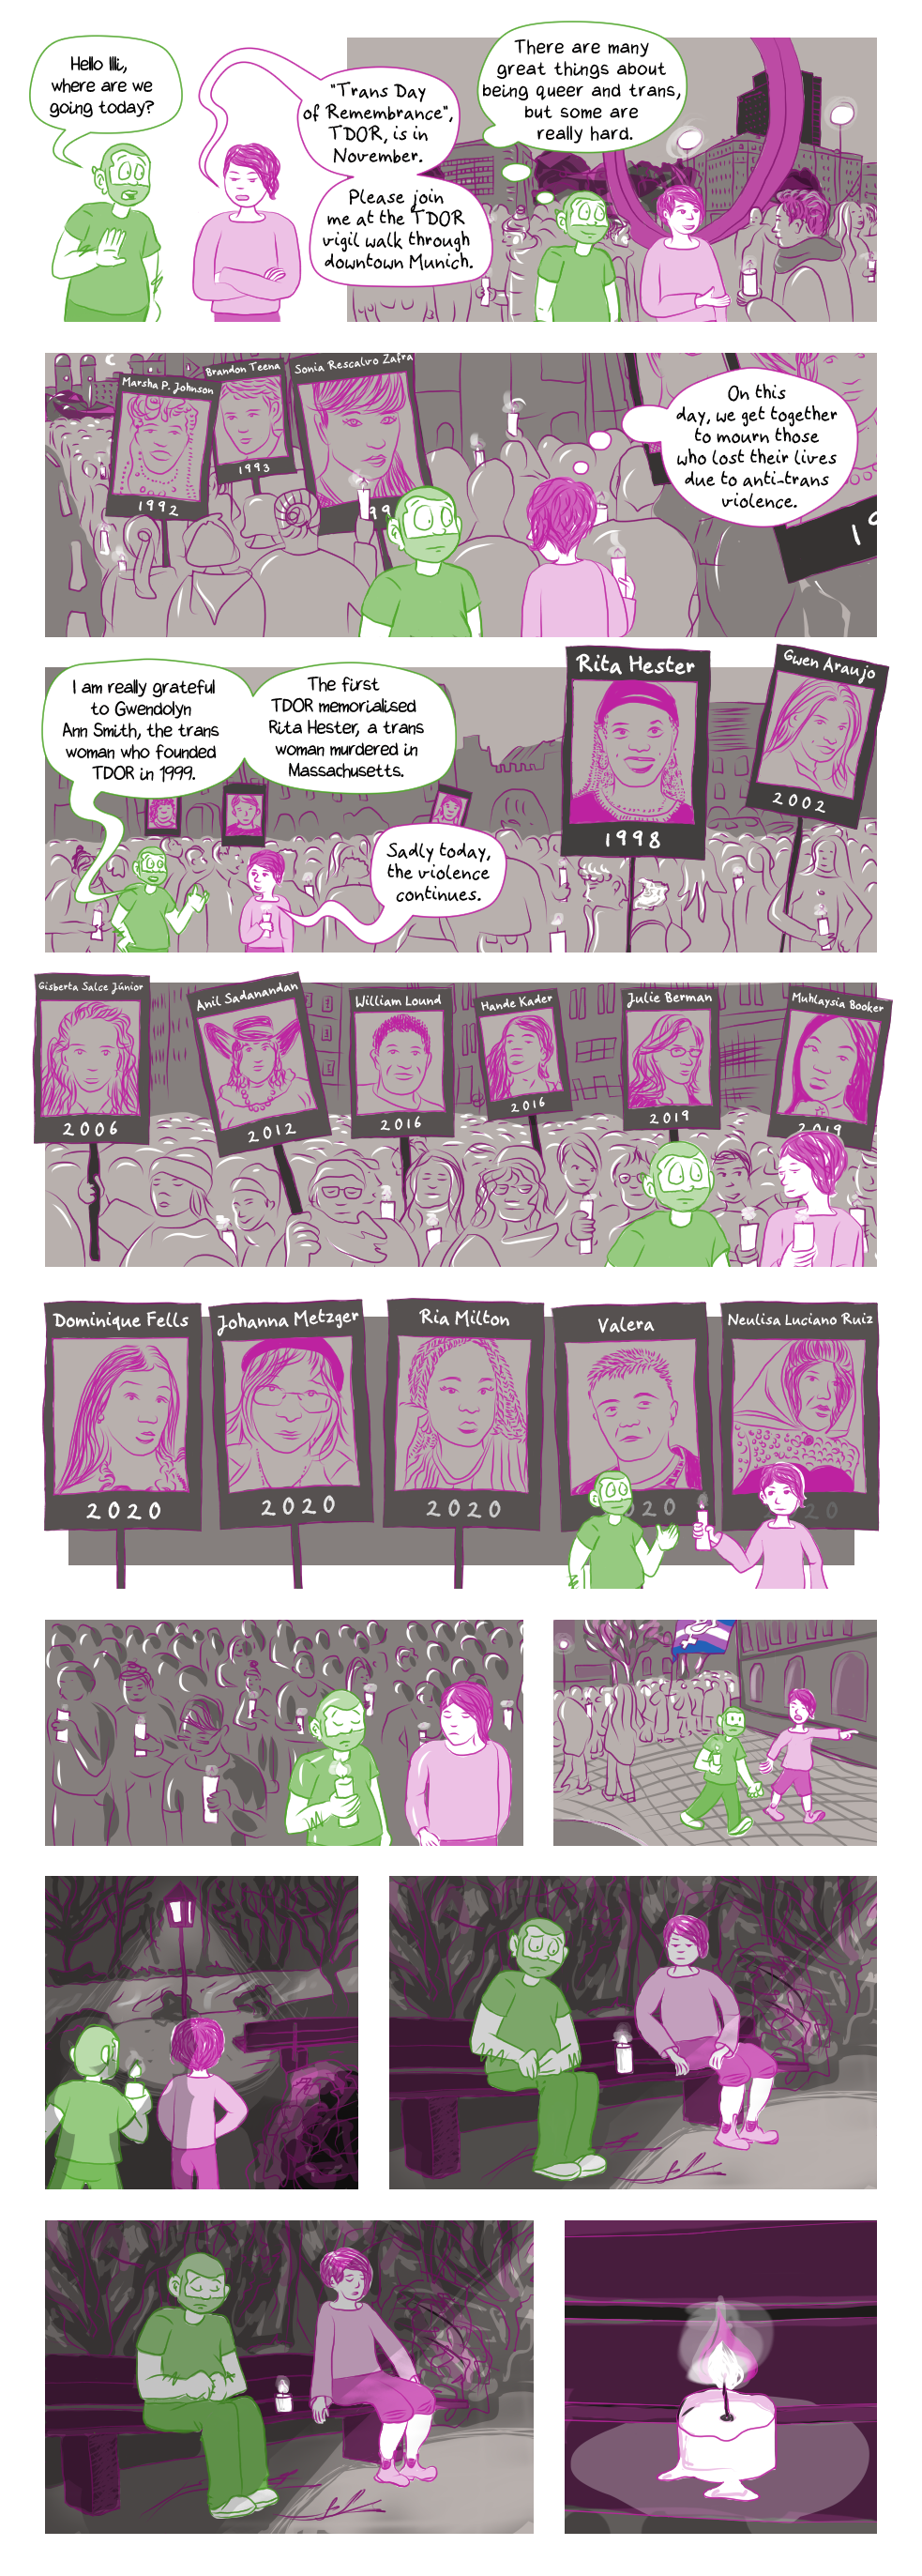 visual comic: Queer Comic Conversation - November: TDOR, scroll down for text-based comic (after annotations)